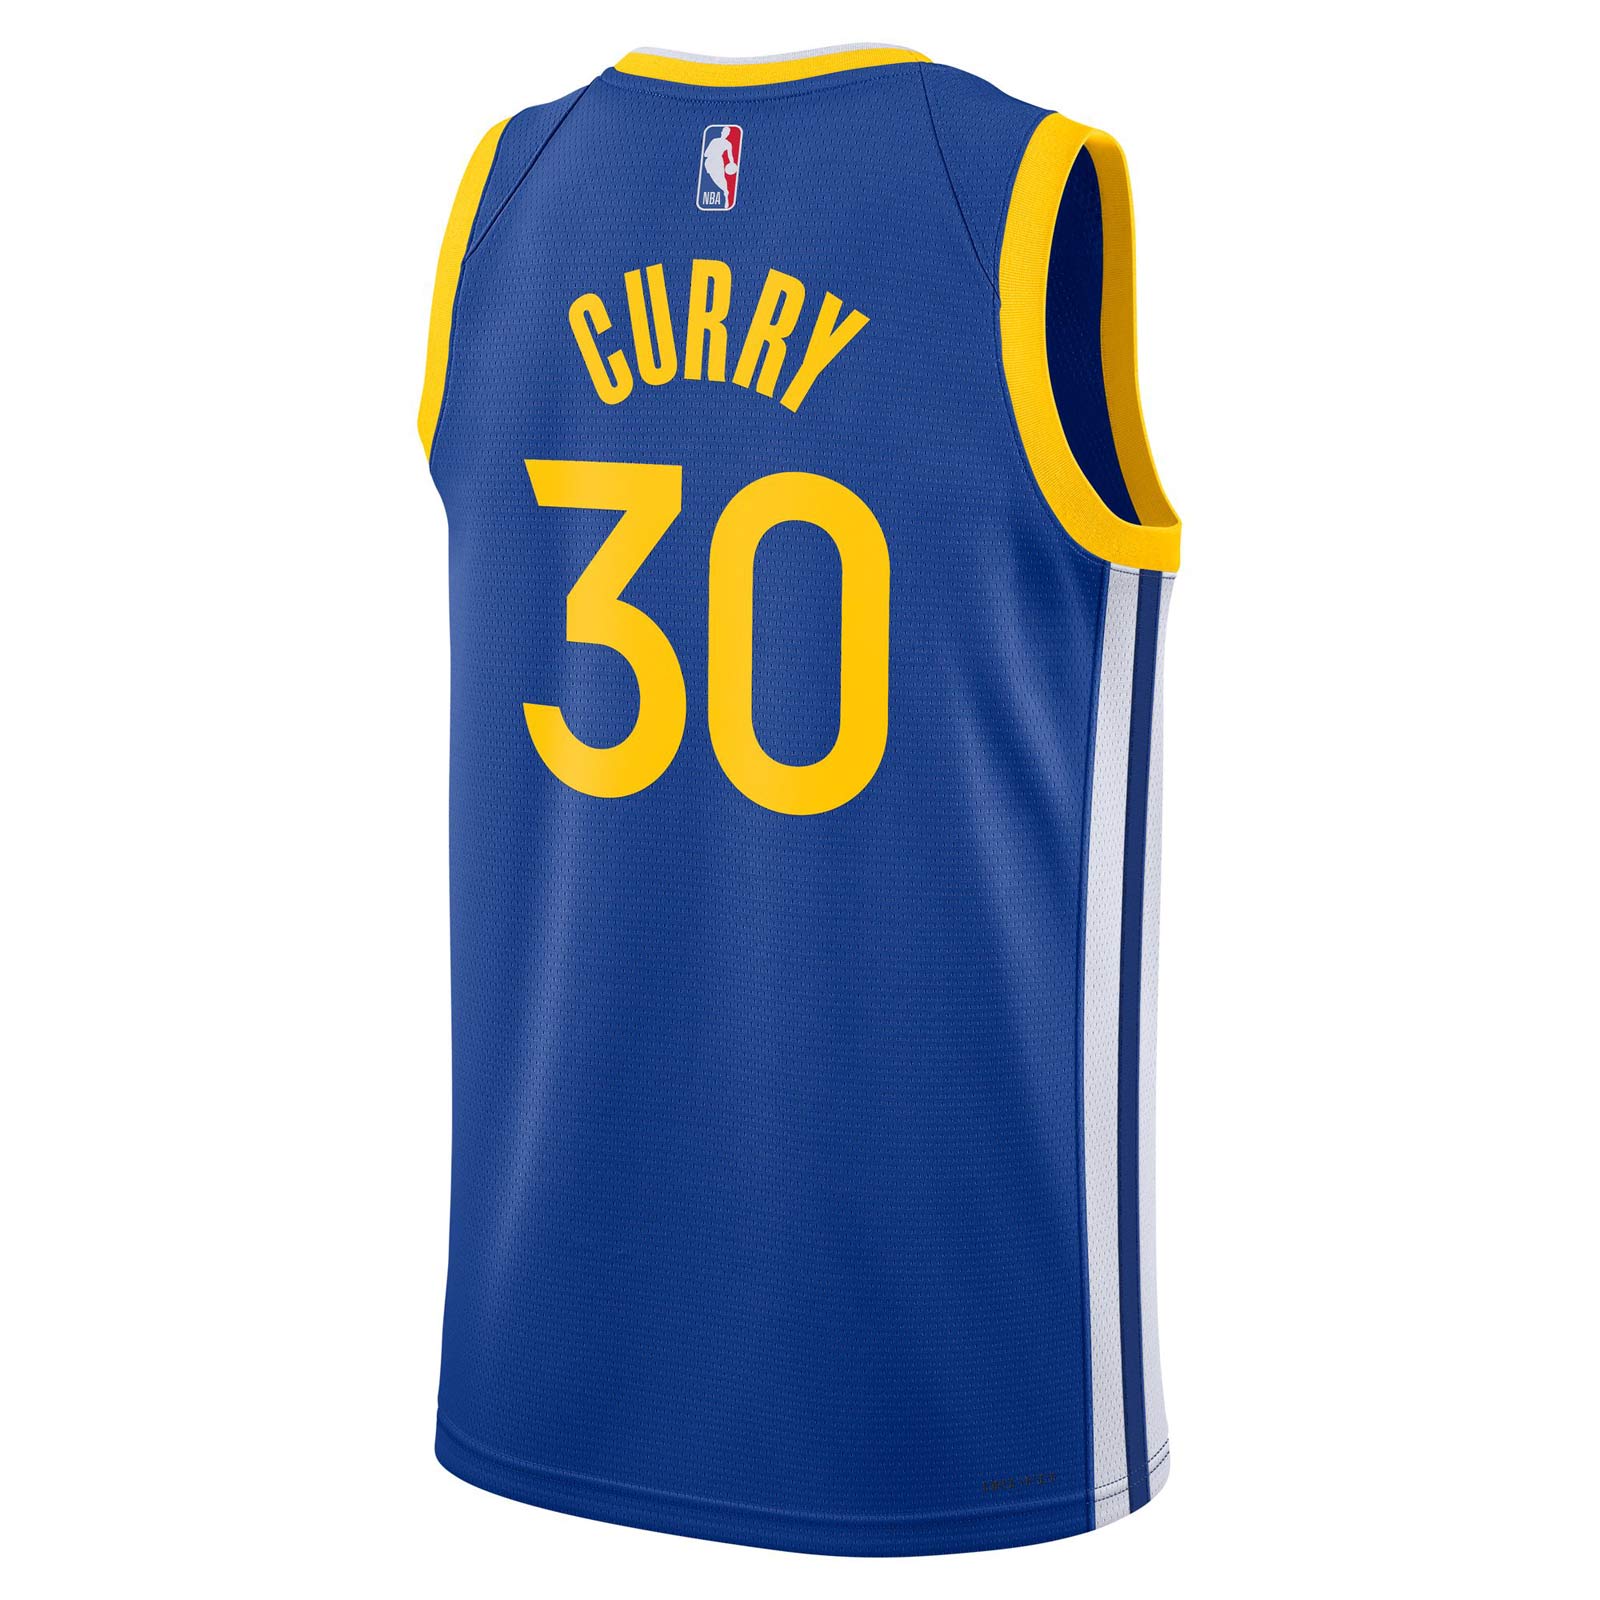 NIKE GOLDEN STATE WARRIORS CURRY 30 DRI-FIT JERSEY 